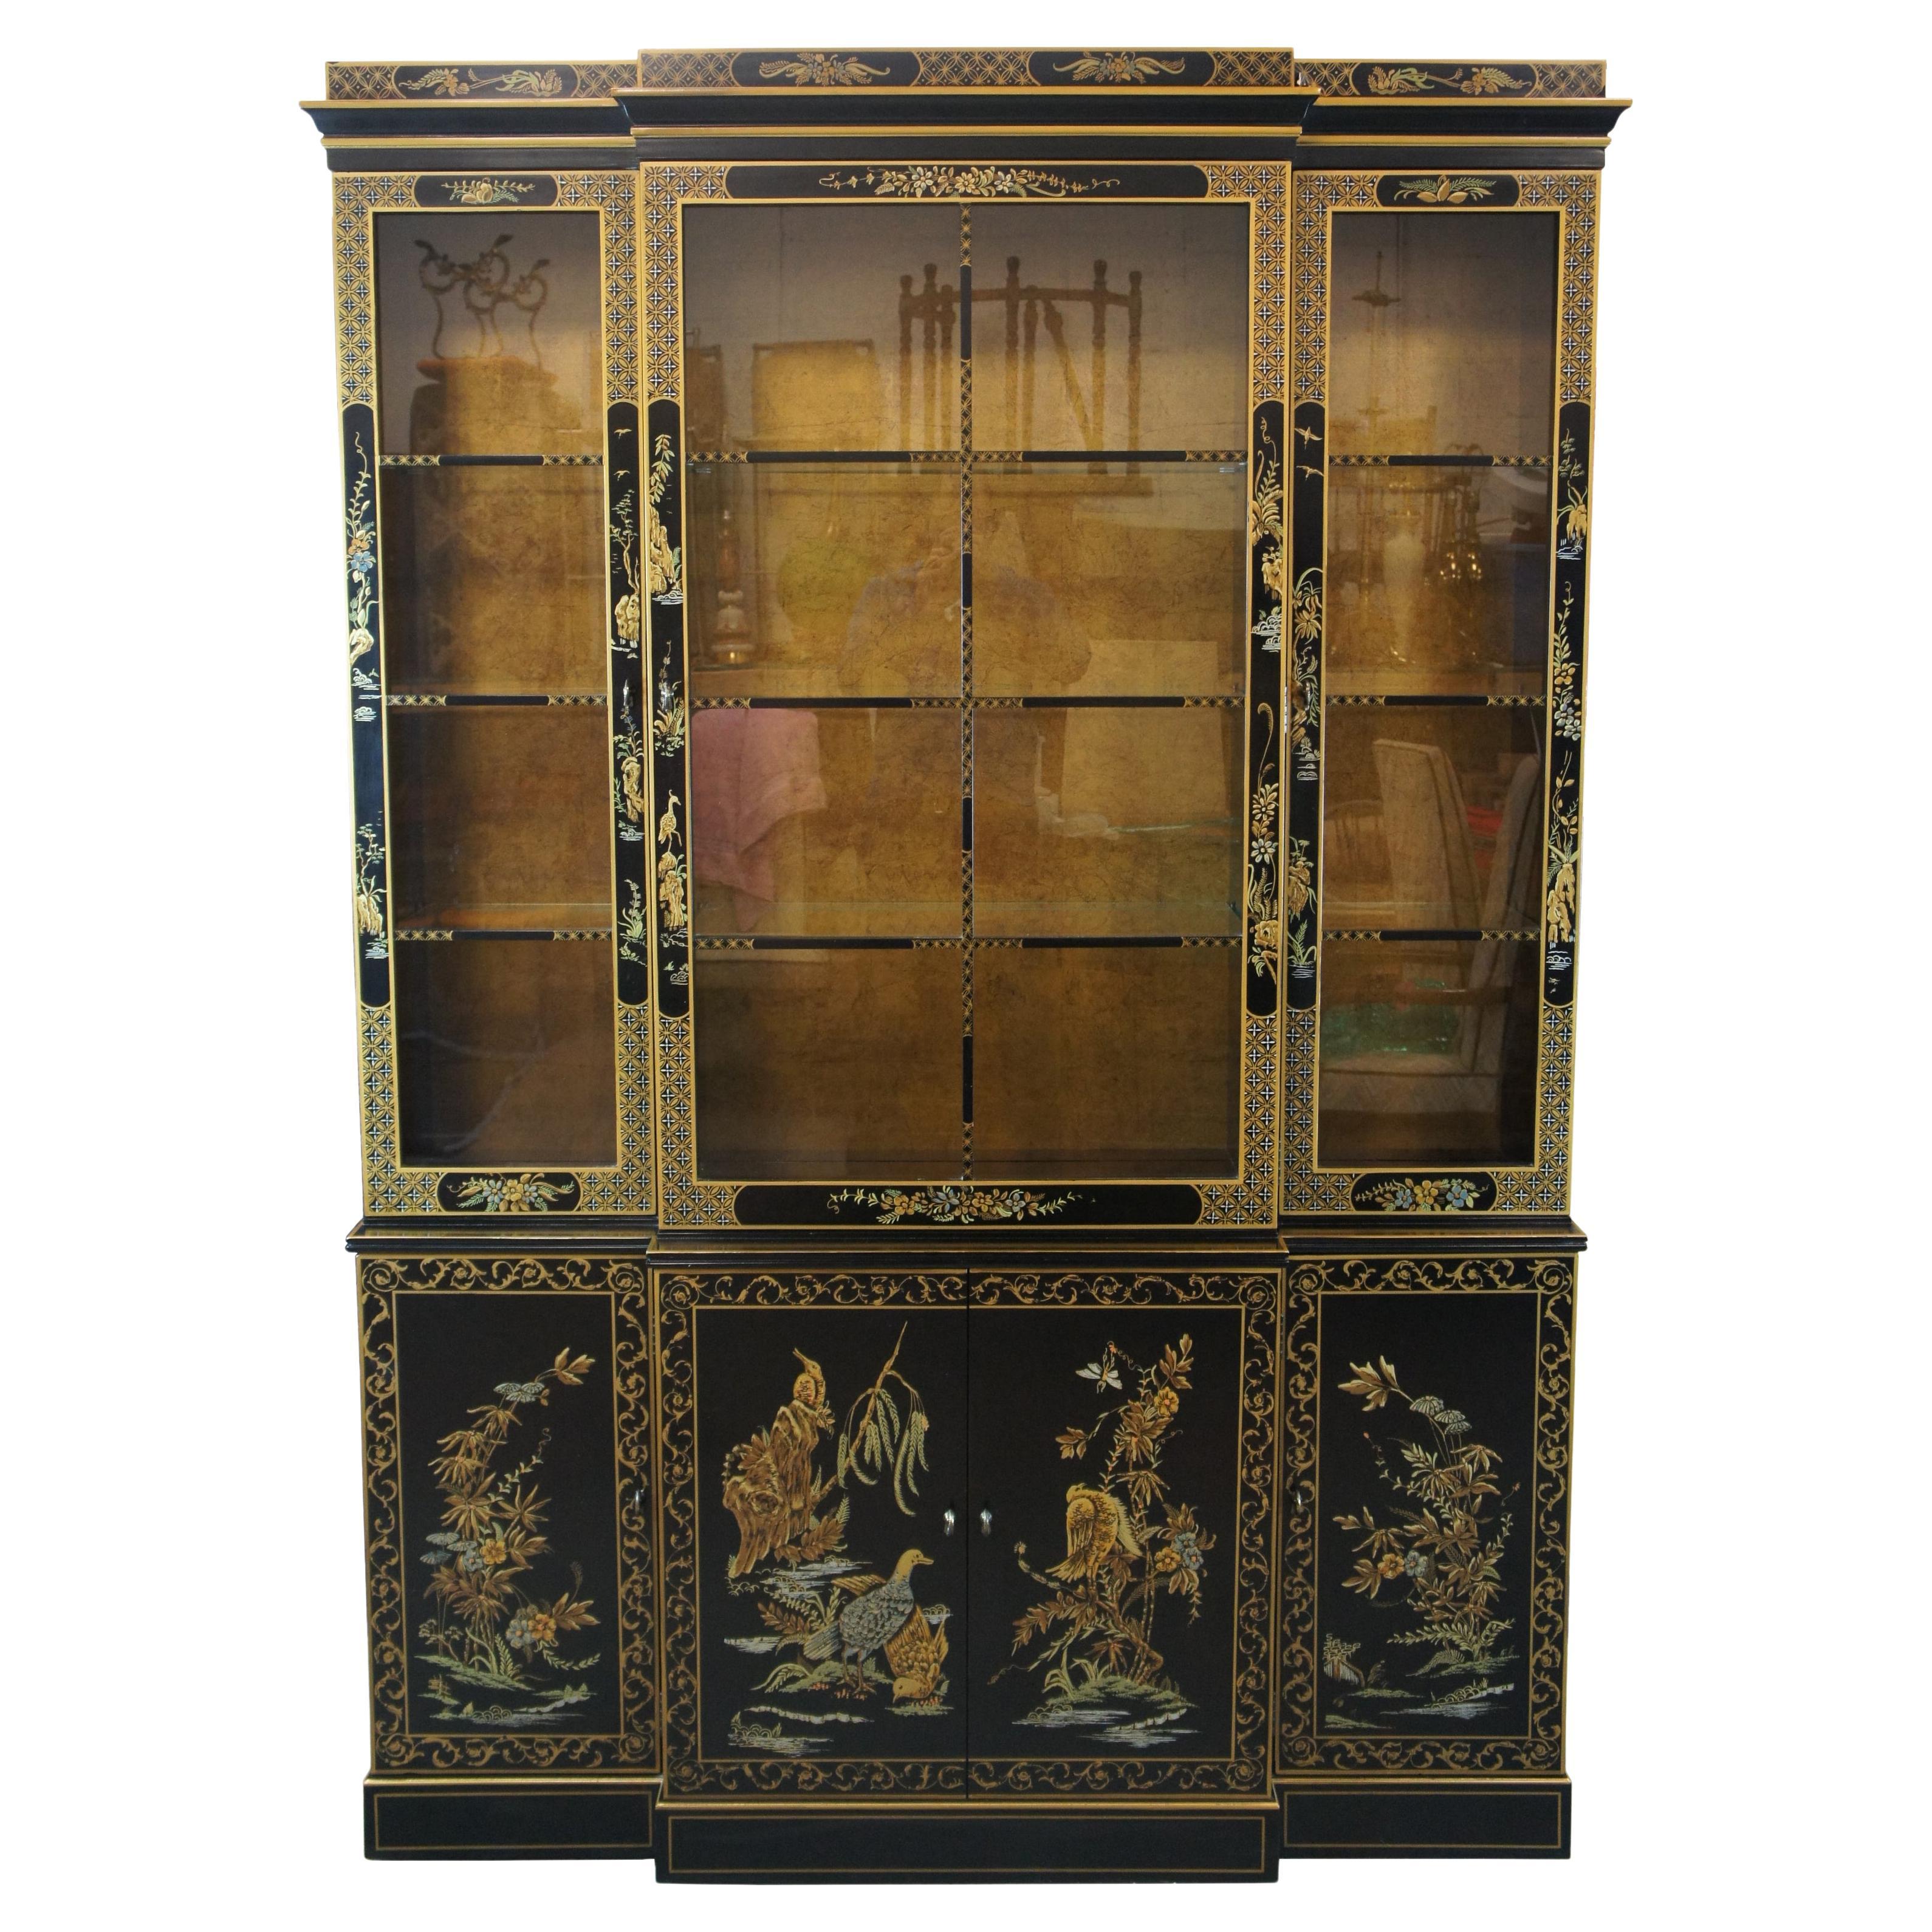 Drexel Heritage Et Cetera Chinoiserie Black Lacquer Breakfront China Cabinet 78'